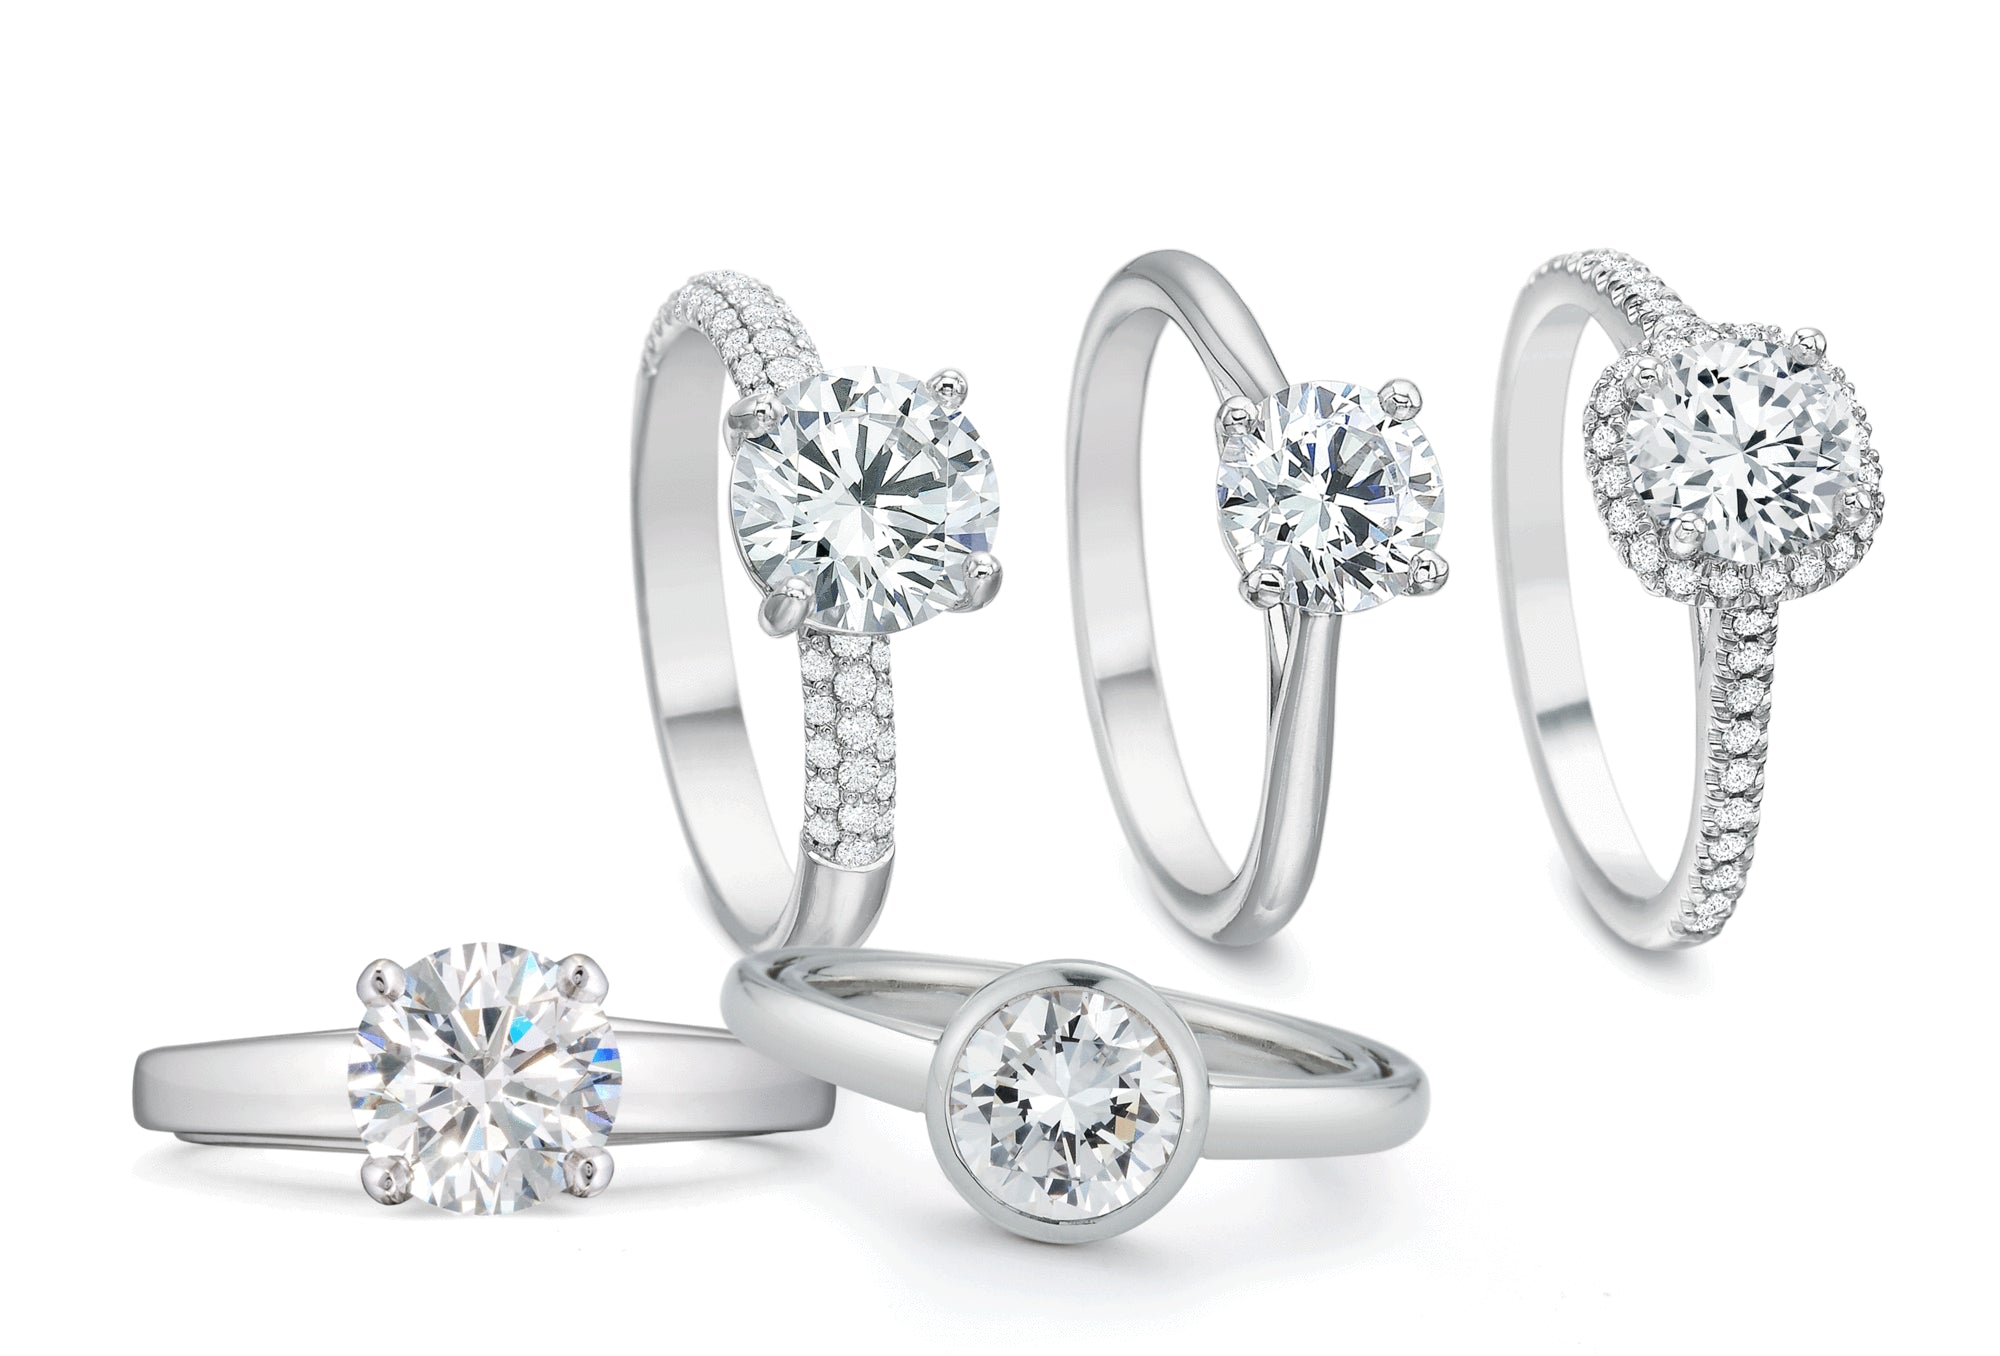 Buy the Diamond Engagement Ring Channel Set Band at our Online Store –  Diana Vincent Jewelry Designs